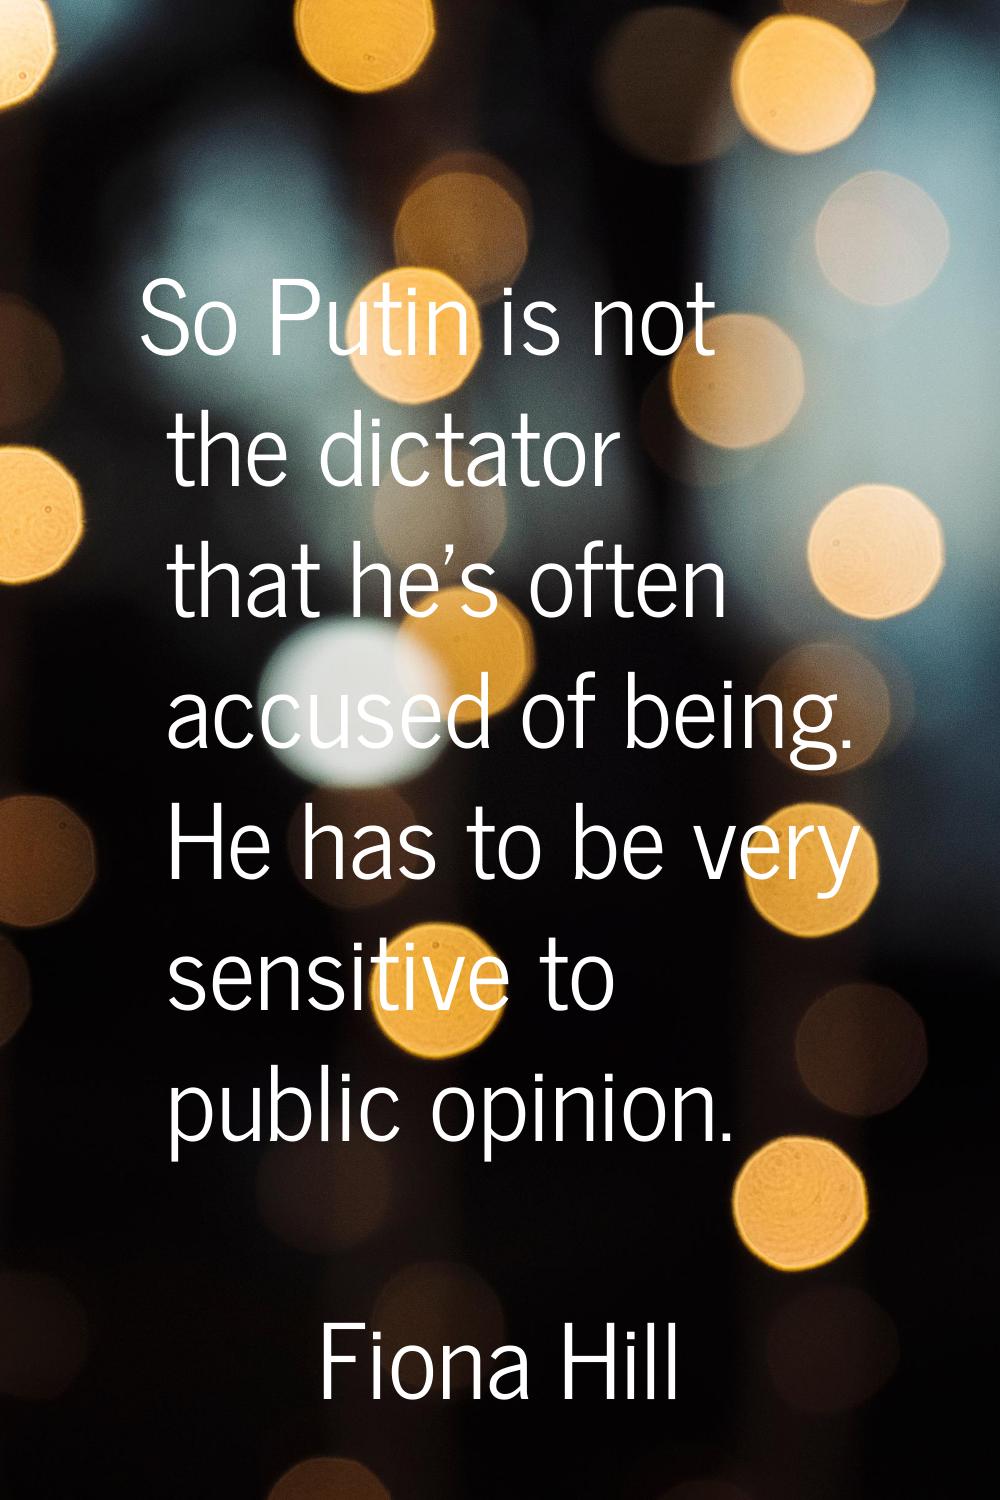 So Putin is not the dictator that he's often accused of being. He has to be very sensitive to publi